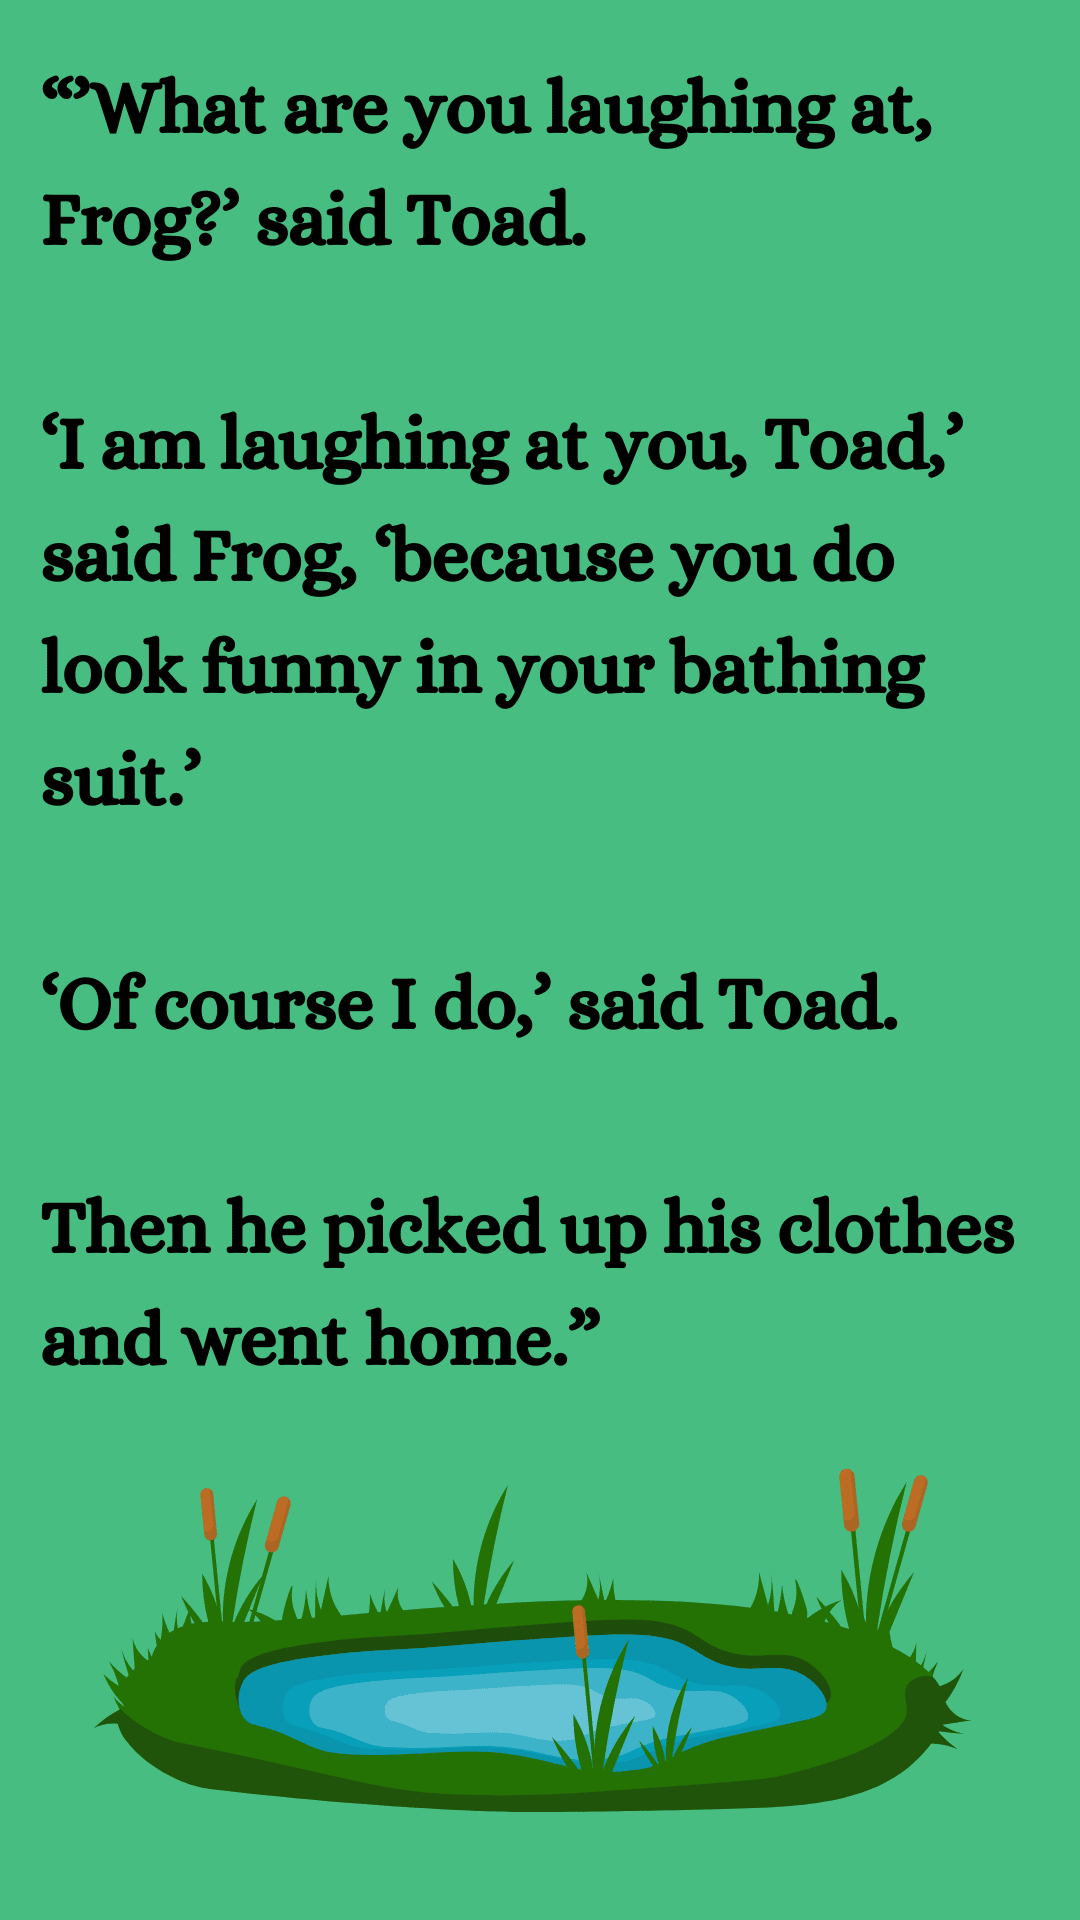 Frog and Toad quote